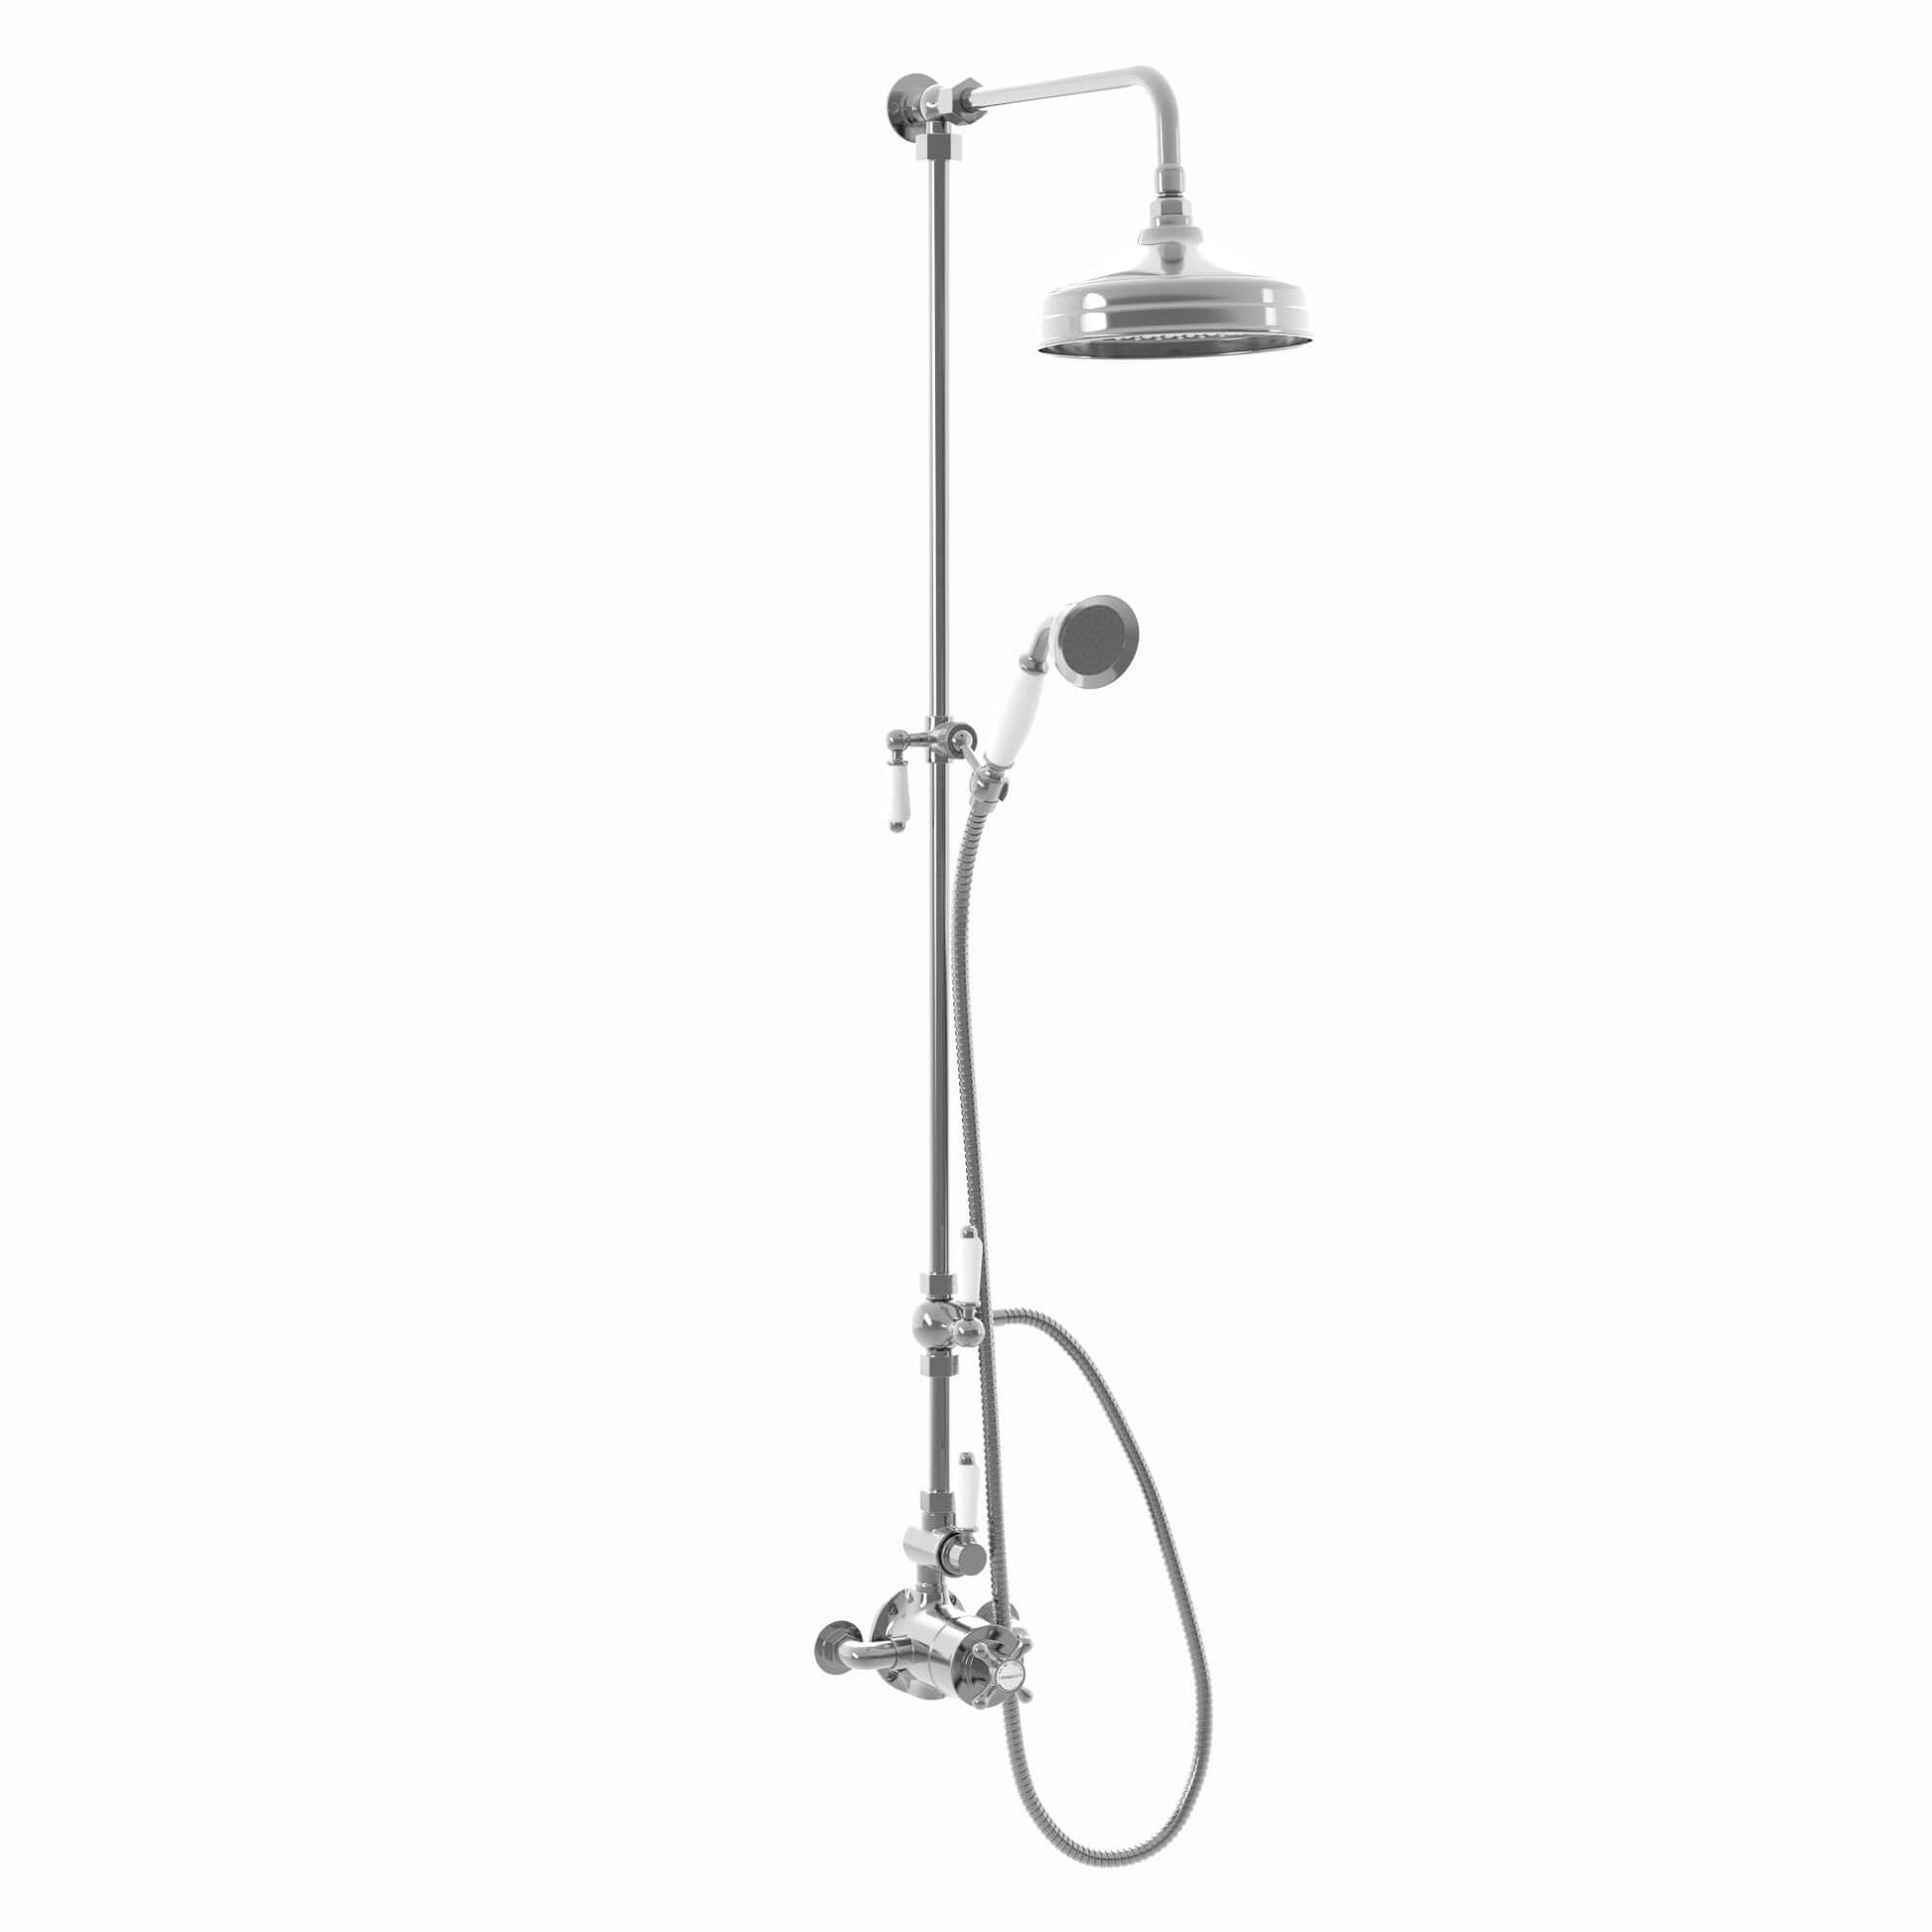 Downton Exposed Traditional Thermostatic Shower Set 2 Outlet Incl. Twin Shower Valve With Diverter, Rigid Riser Rail, 200mm Shower Head & Ceramic Handset - Chrome And White - Showers